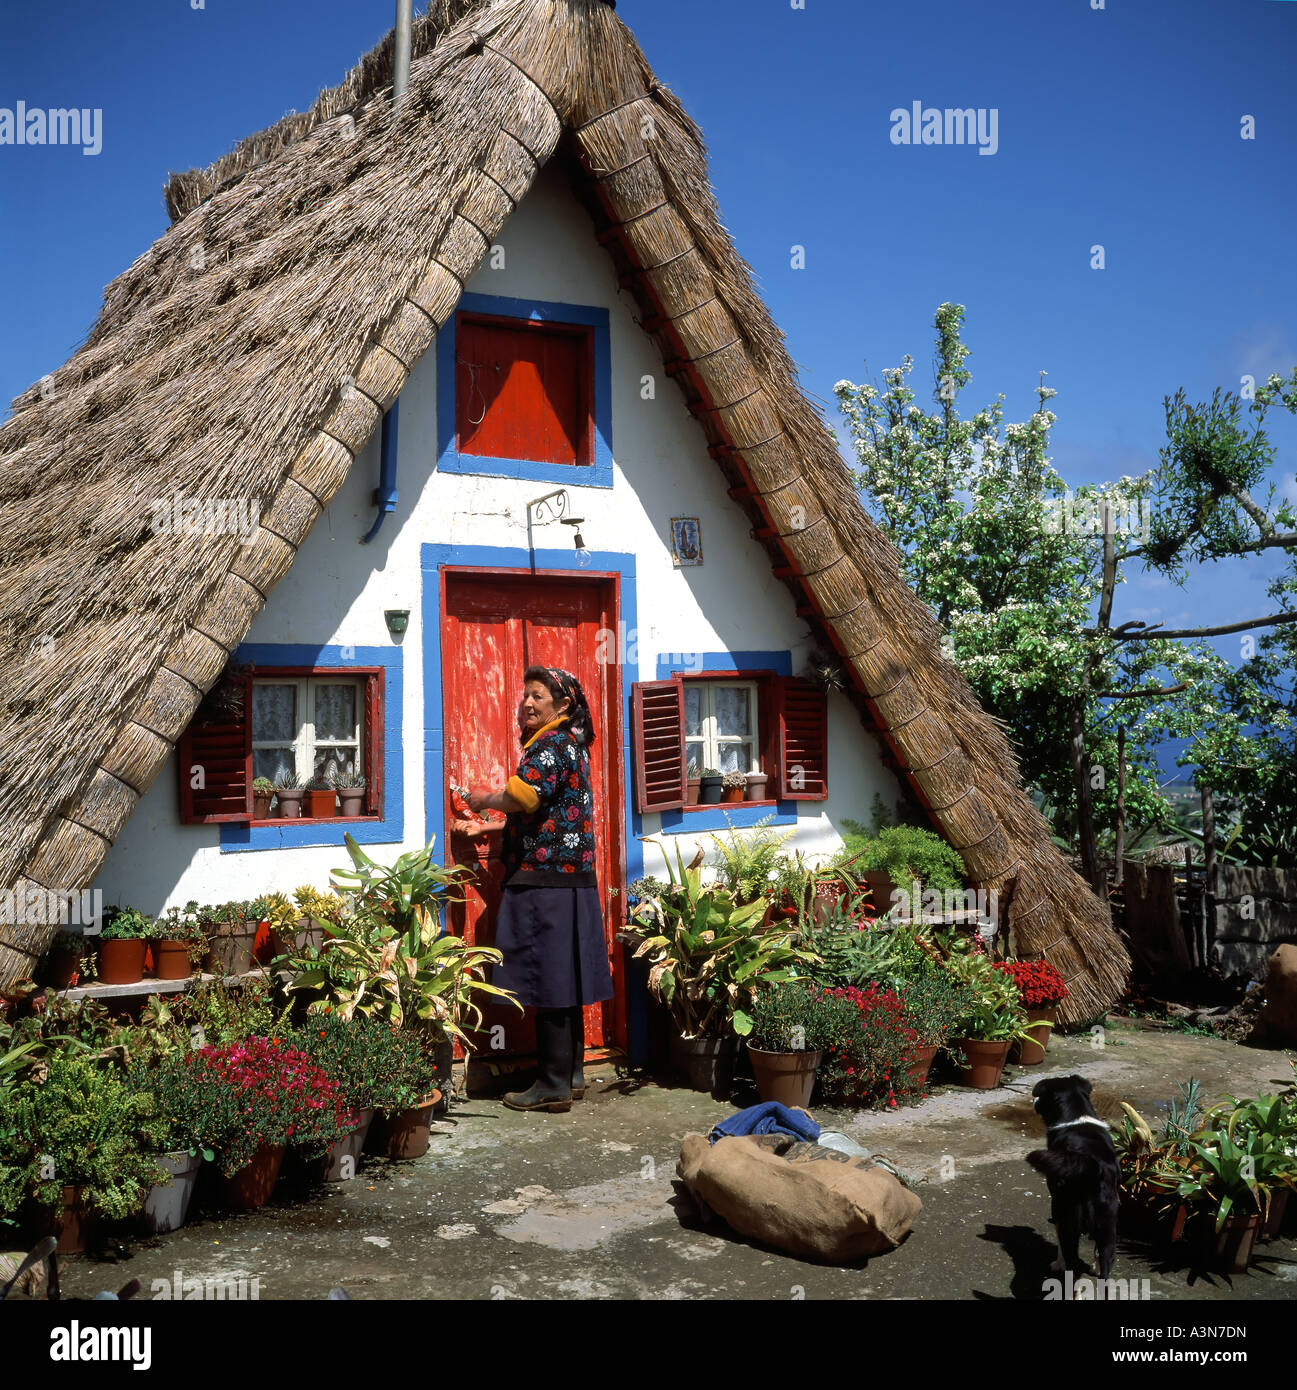 MR WOMAN IN FRONT OF A  PALHEIRO  TRADITIONAL THATCHED HOUSE  SANTANA  VILLAGE  MADEIRA  ISLAND PORTUGAL Stock Photo